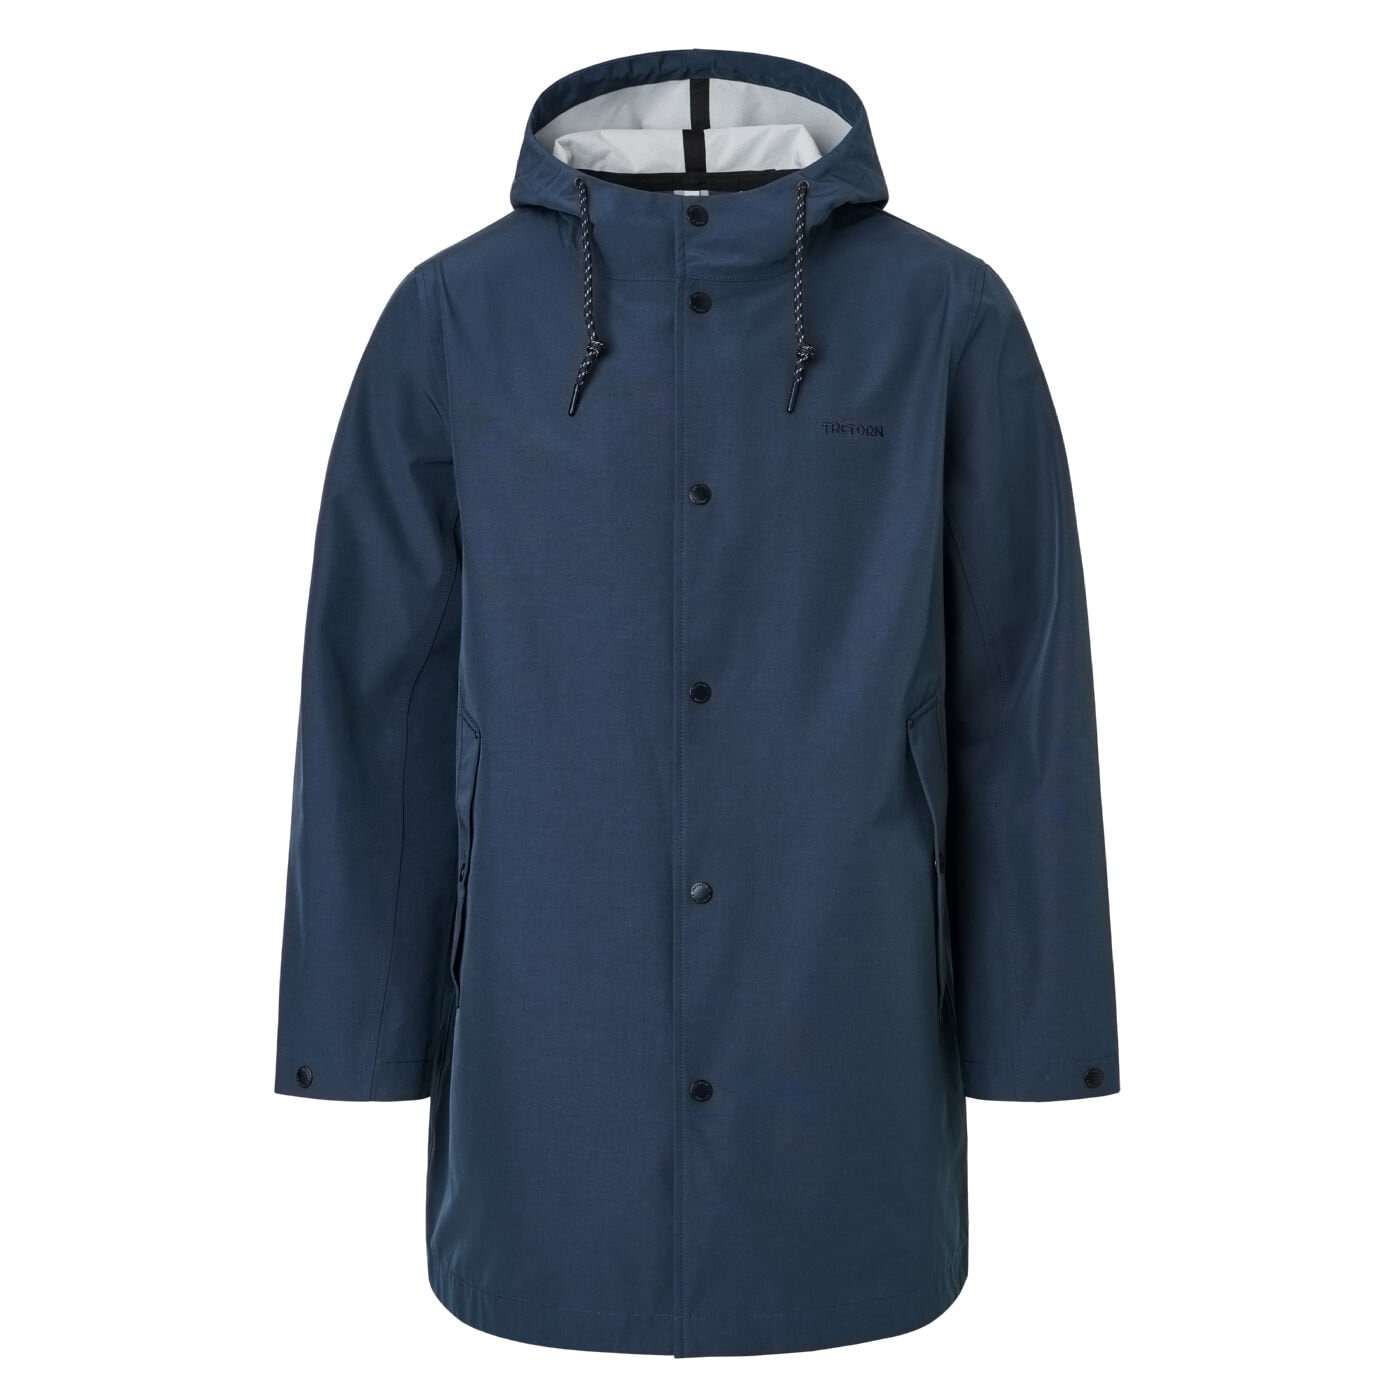 ICON rain coat by Tretorn in the colour blue for men and women